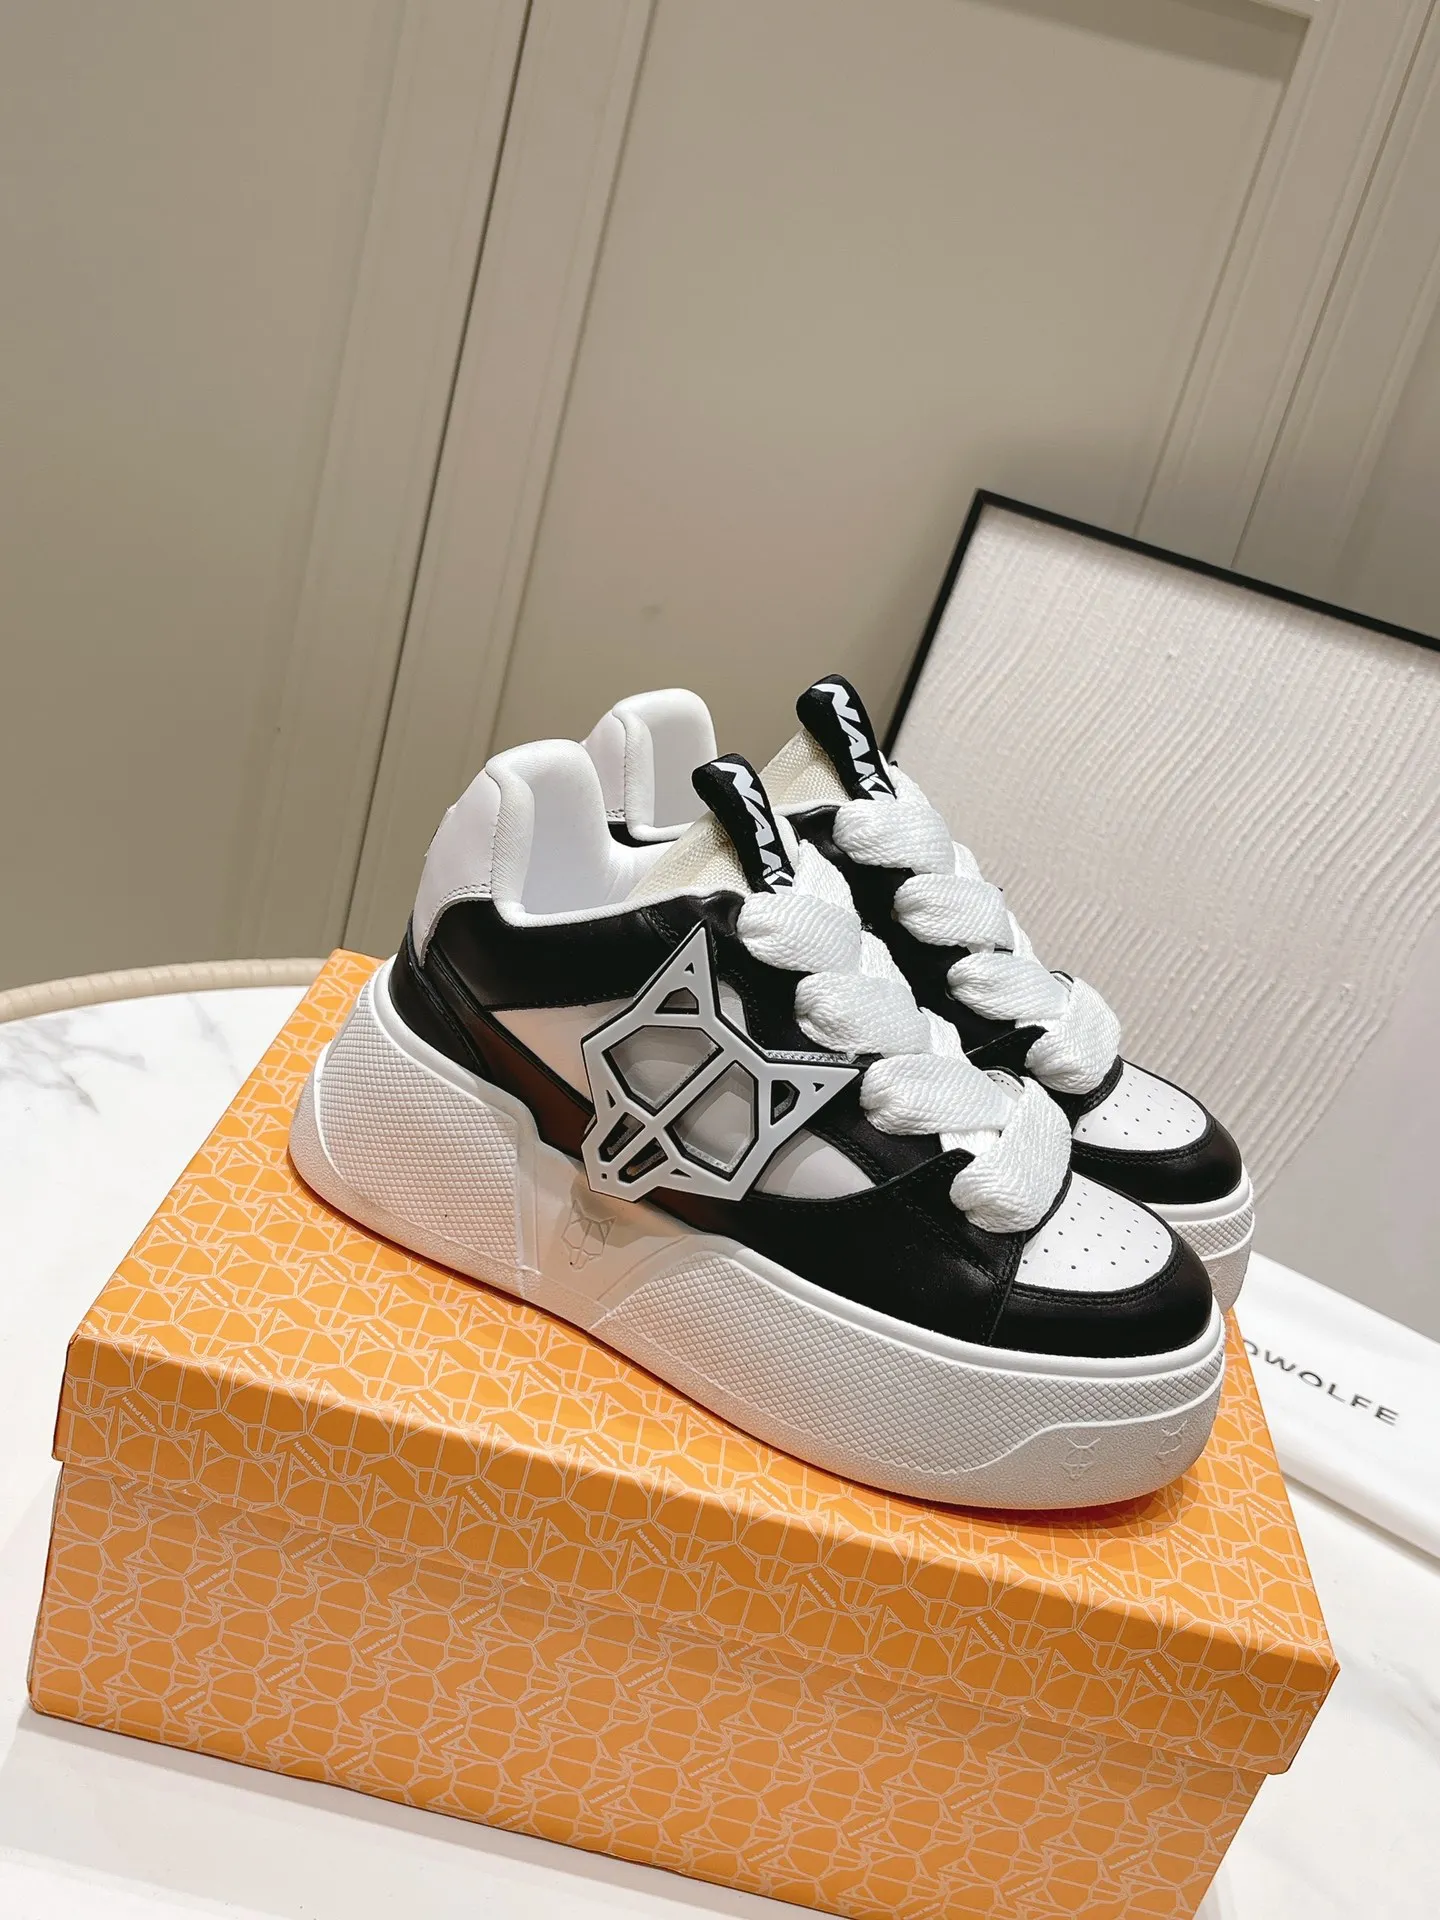 

Women Shoes Naked Runway Wolfe City Sneakers White Black Genuine Real Leather Trainers